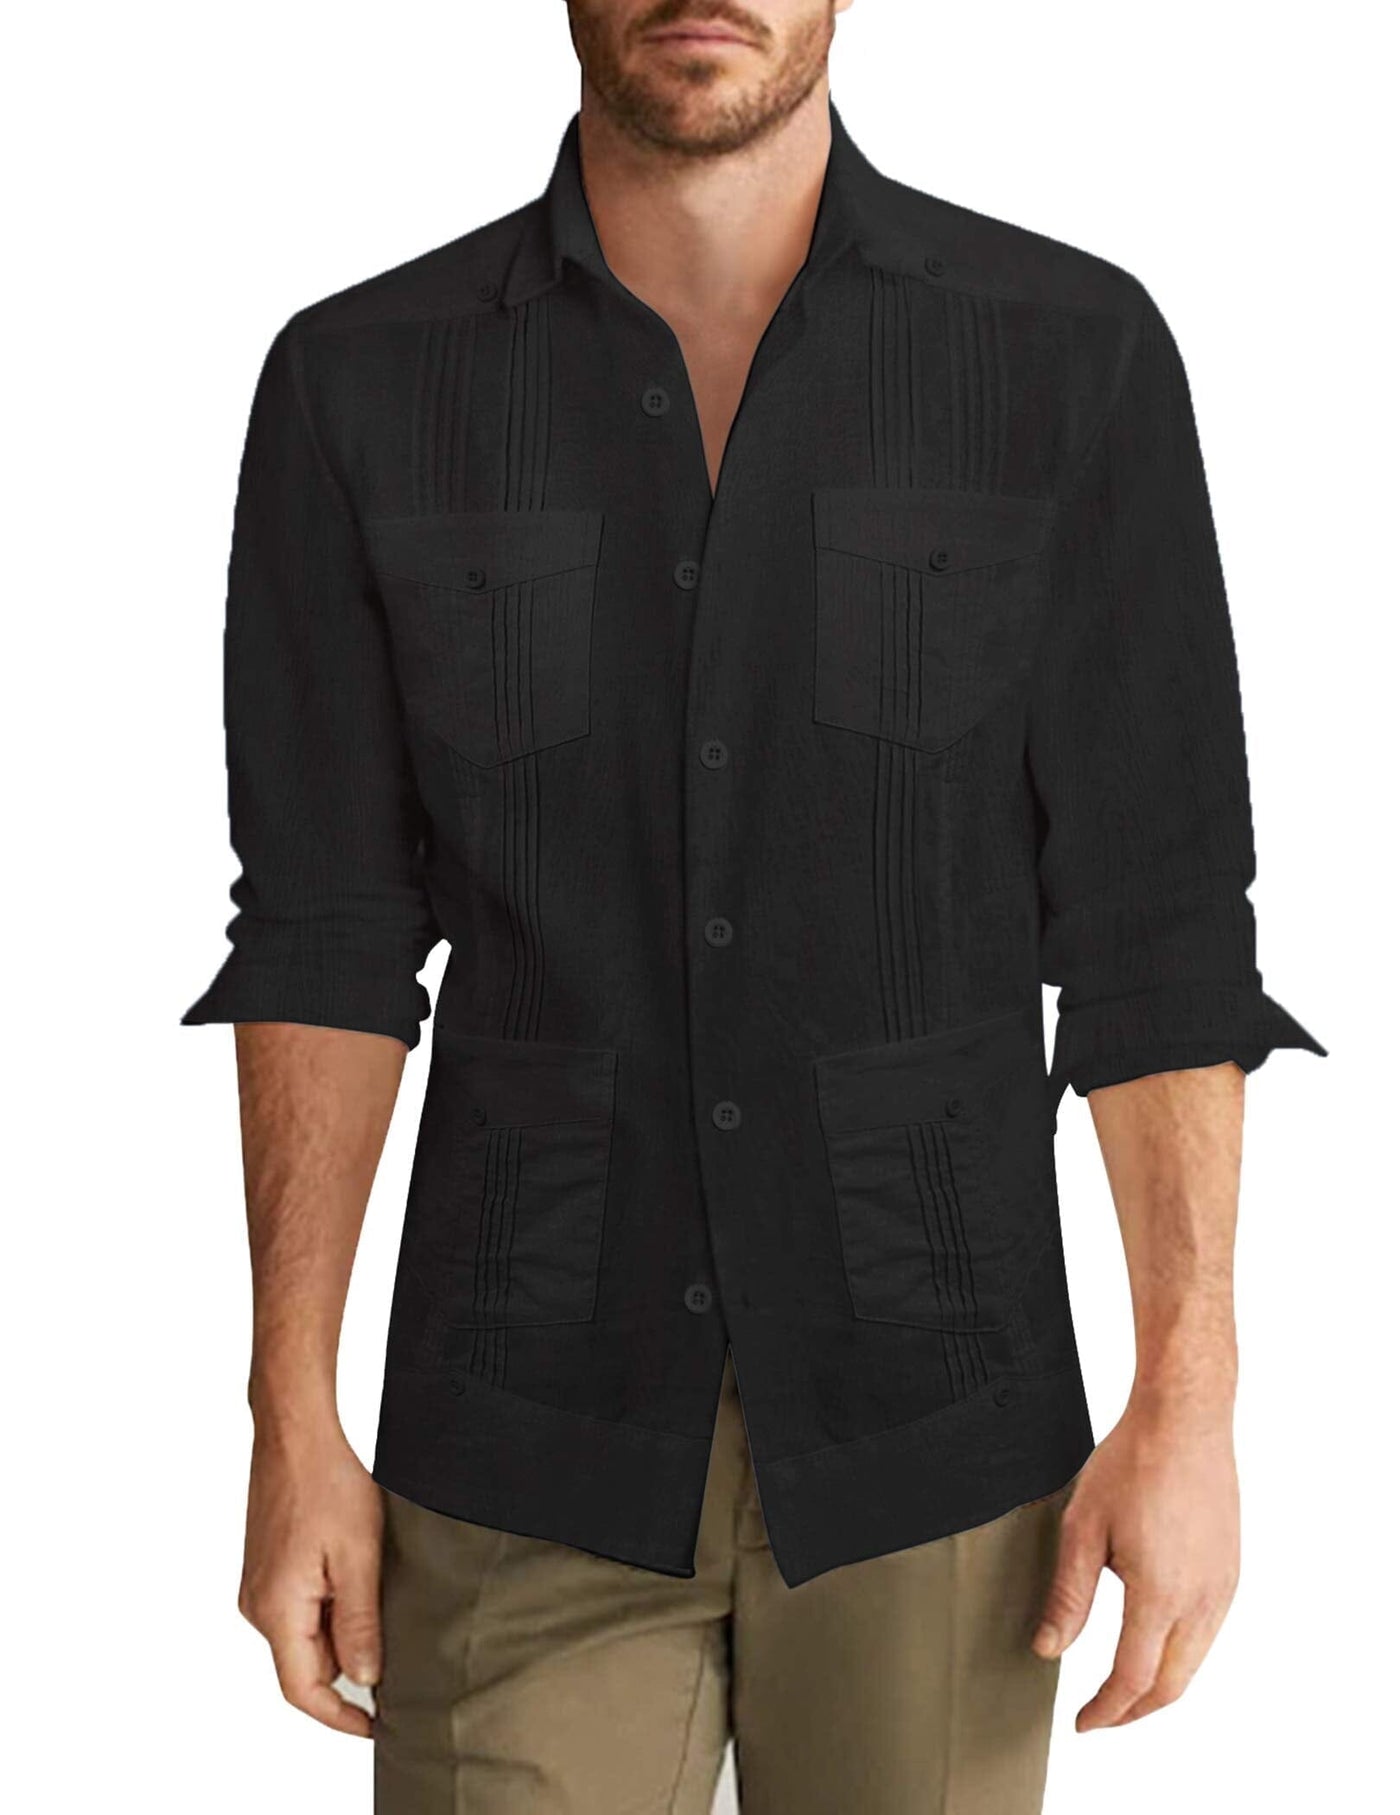 Coofandy Cotton Style Pocket Shirt (US Only) Shirts coofandy Black S 